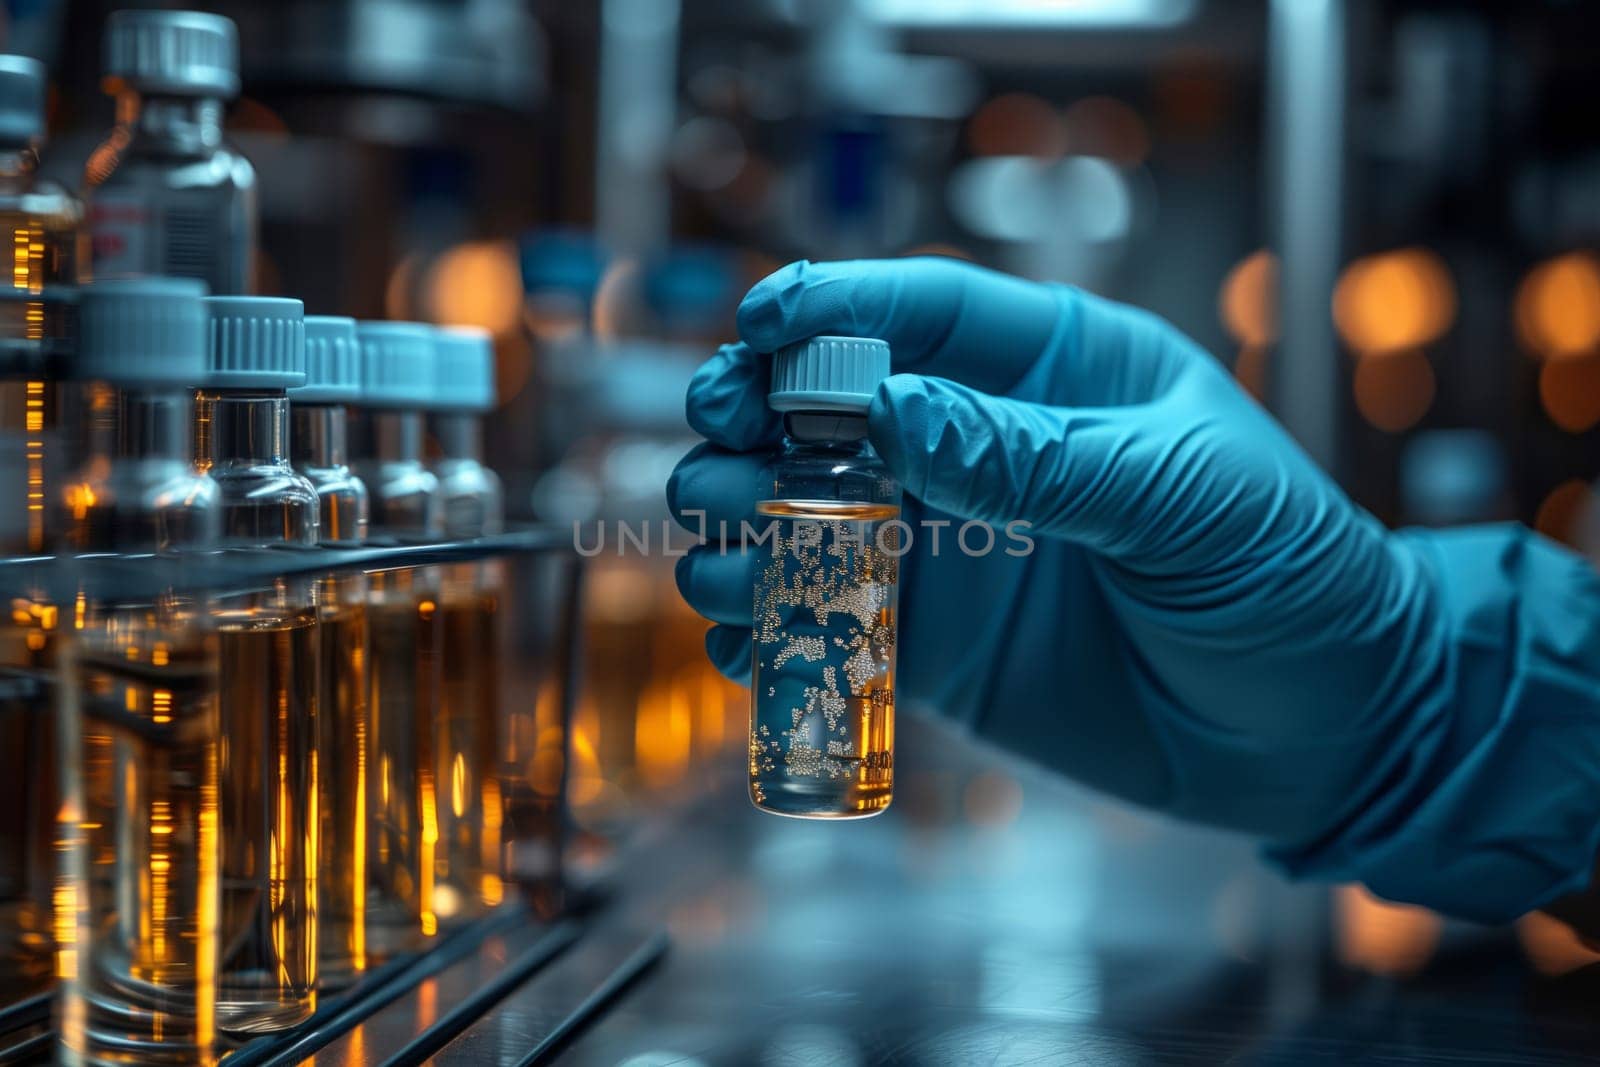 In the laboratory, a scientist is holding a small bottle of electric blue fluid, possibly a solution or drinkware